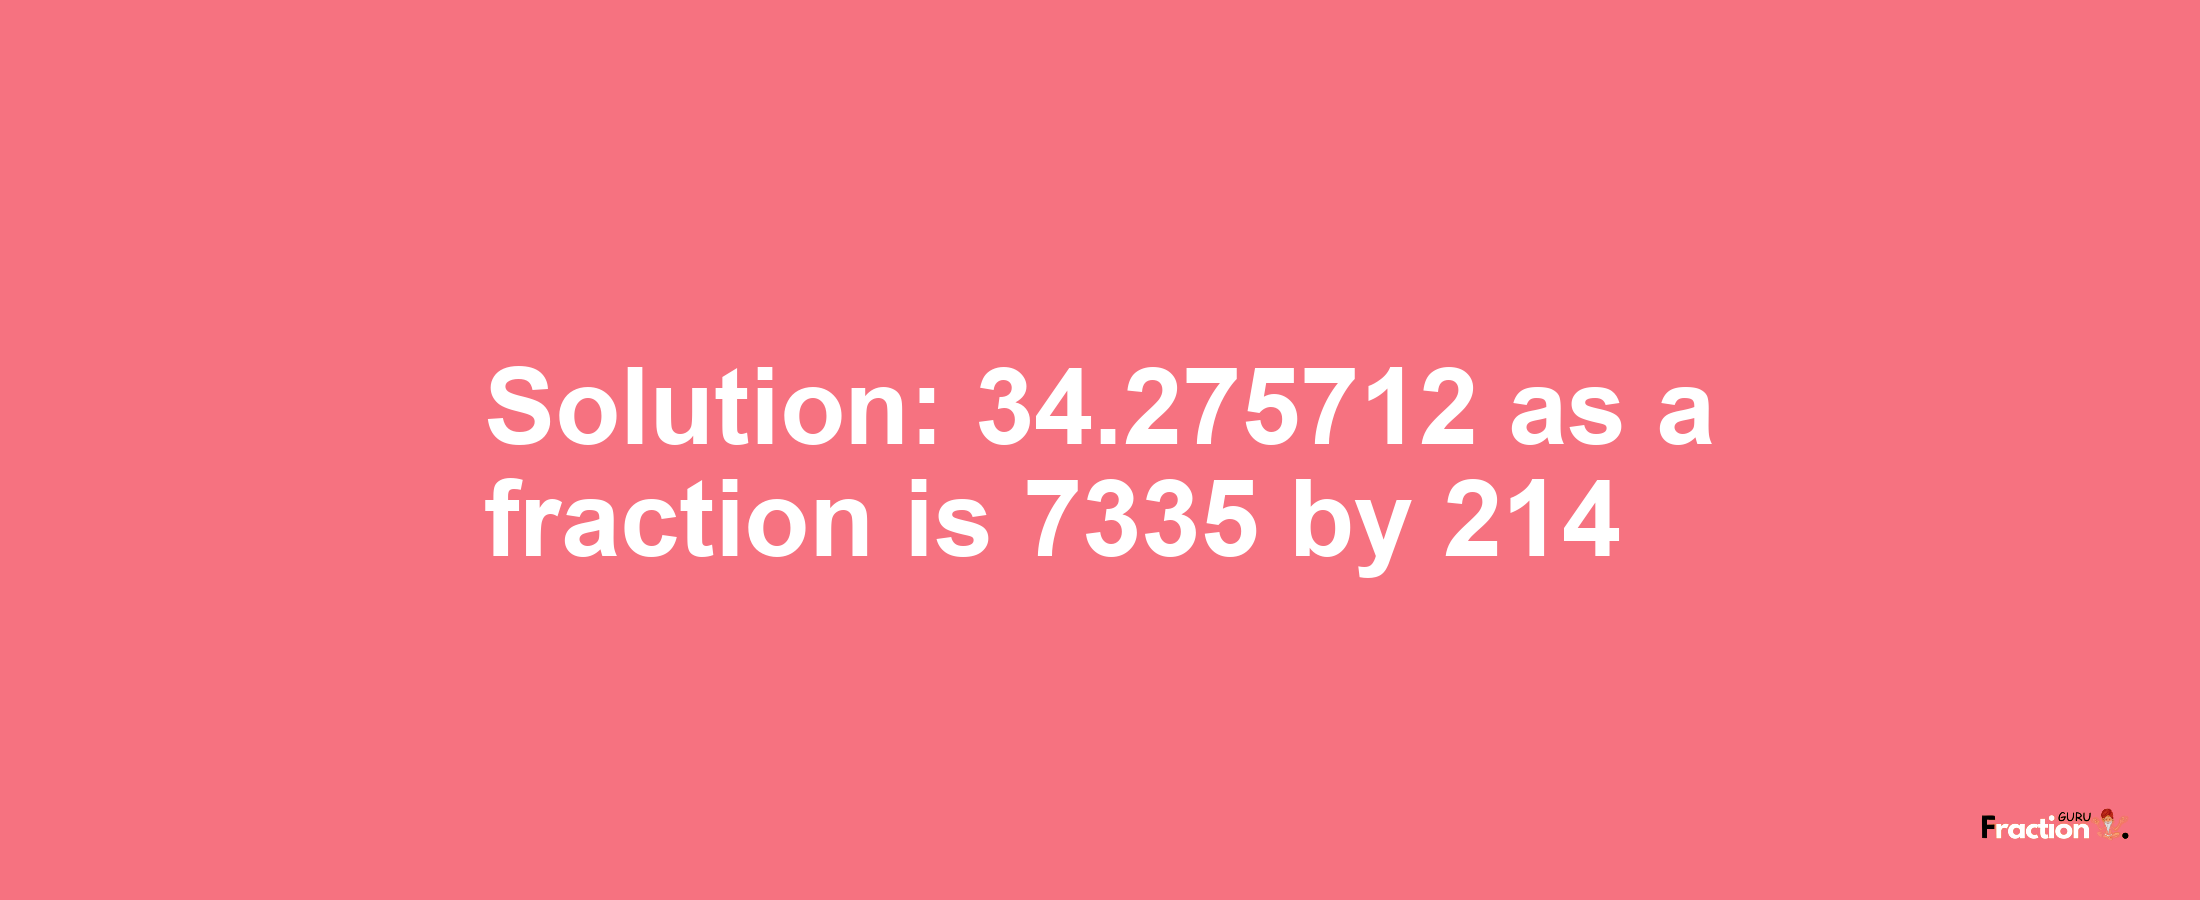 Solution:34.275712 as a fraction is 7335/214